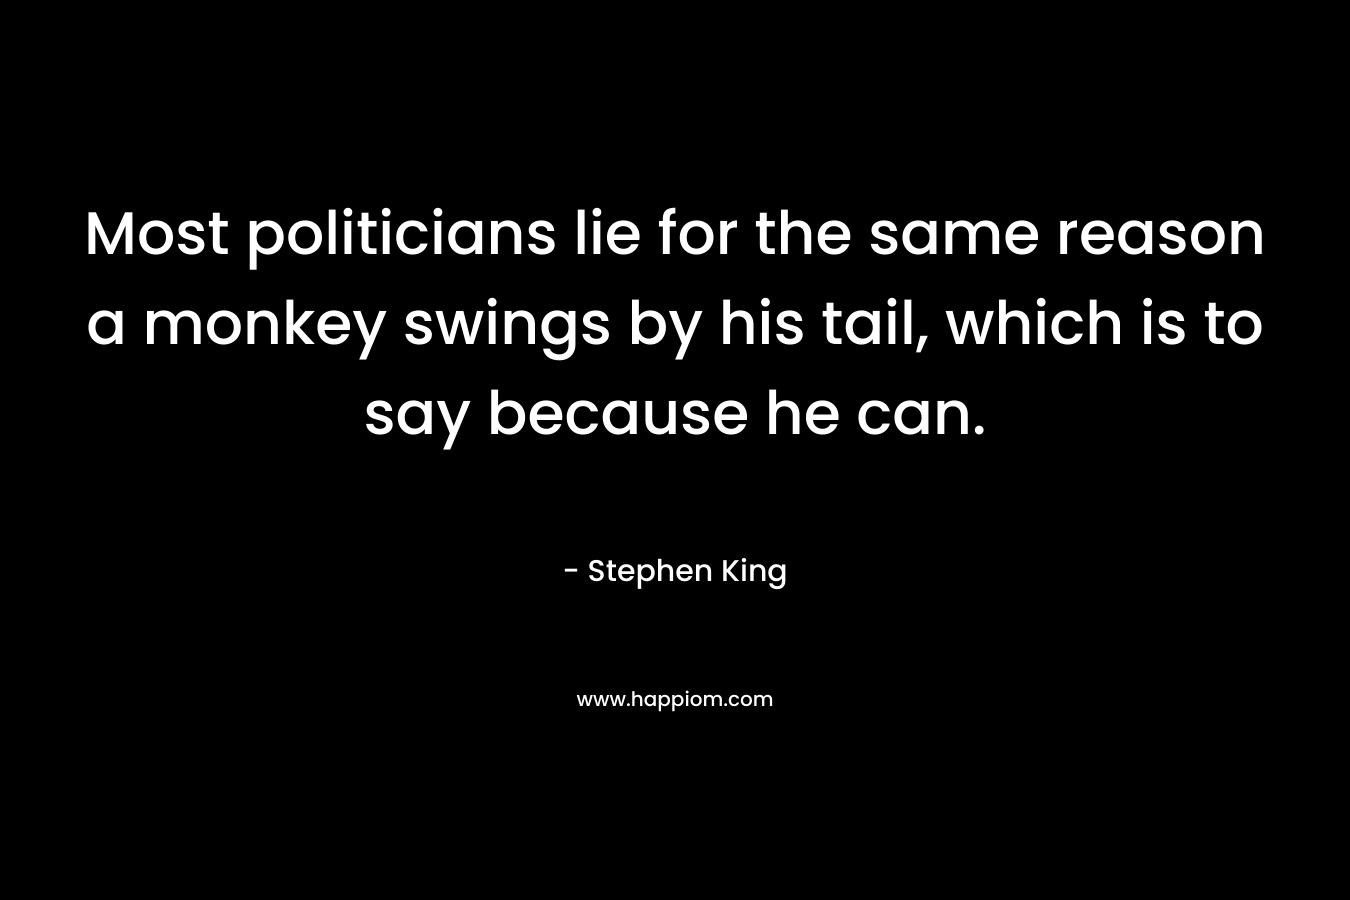 Most politicians lie for the same reason a monkey swings by his tail, which is to say because he can. – Stephen King